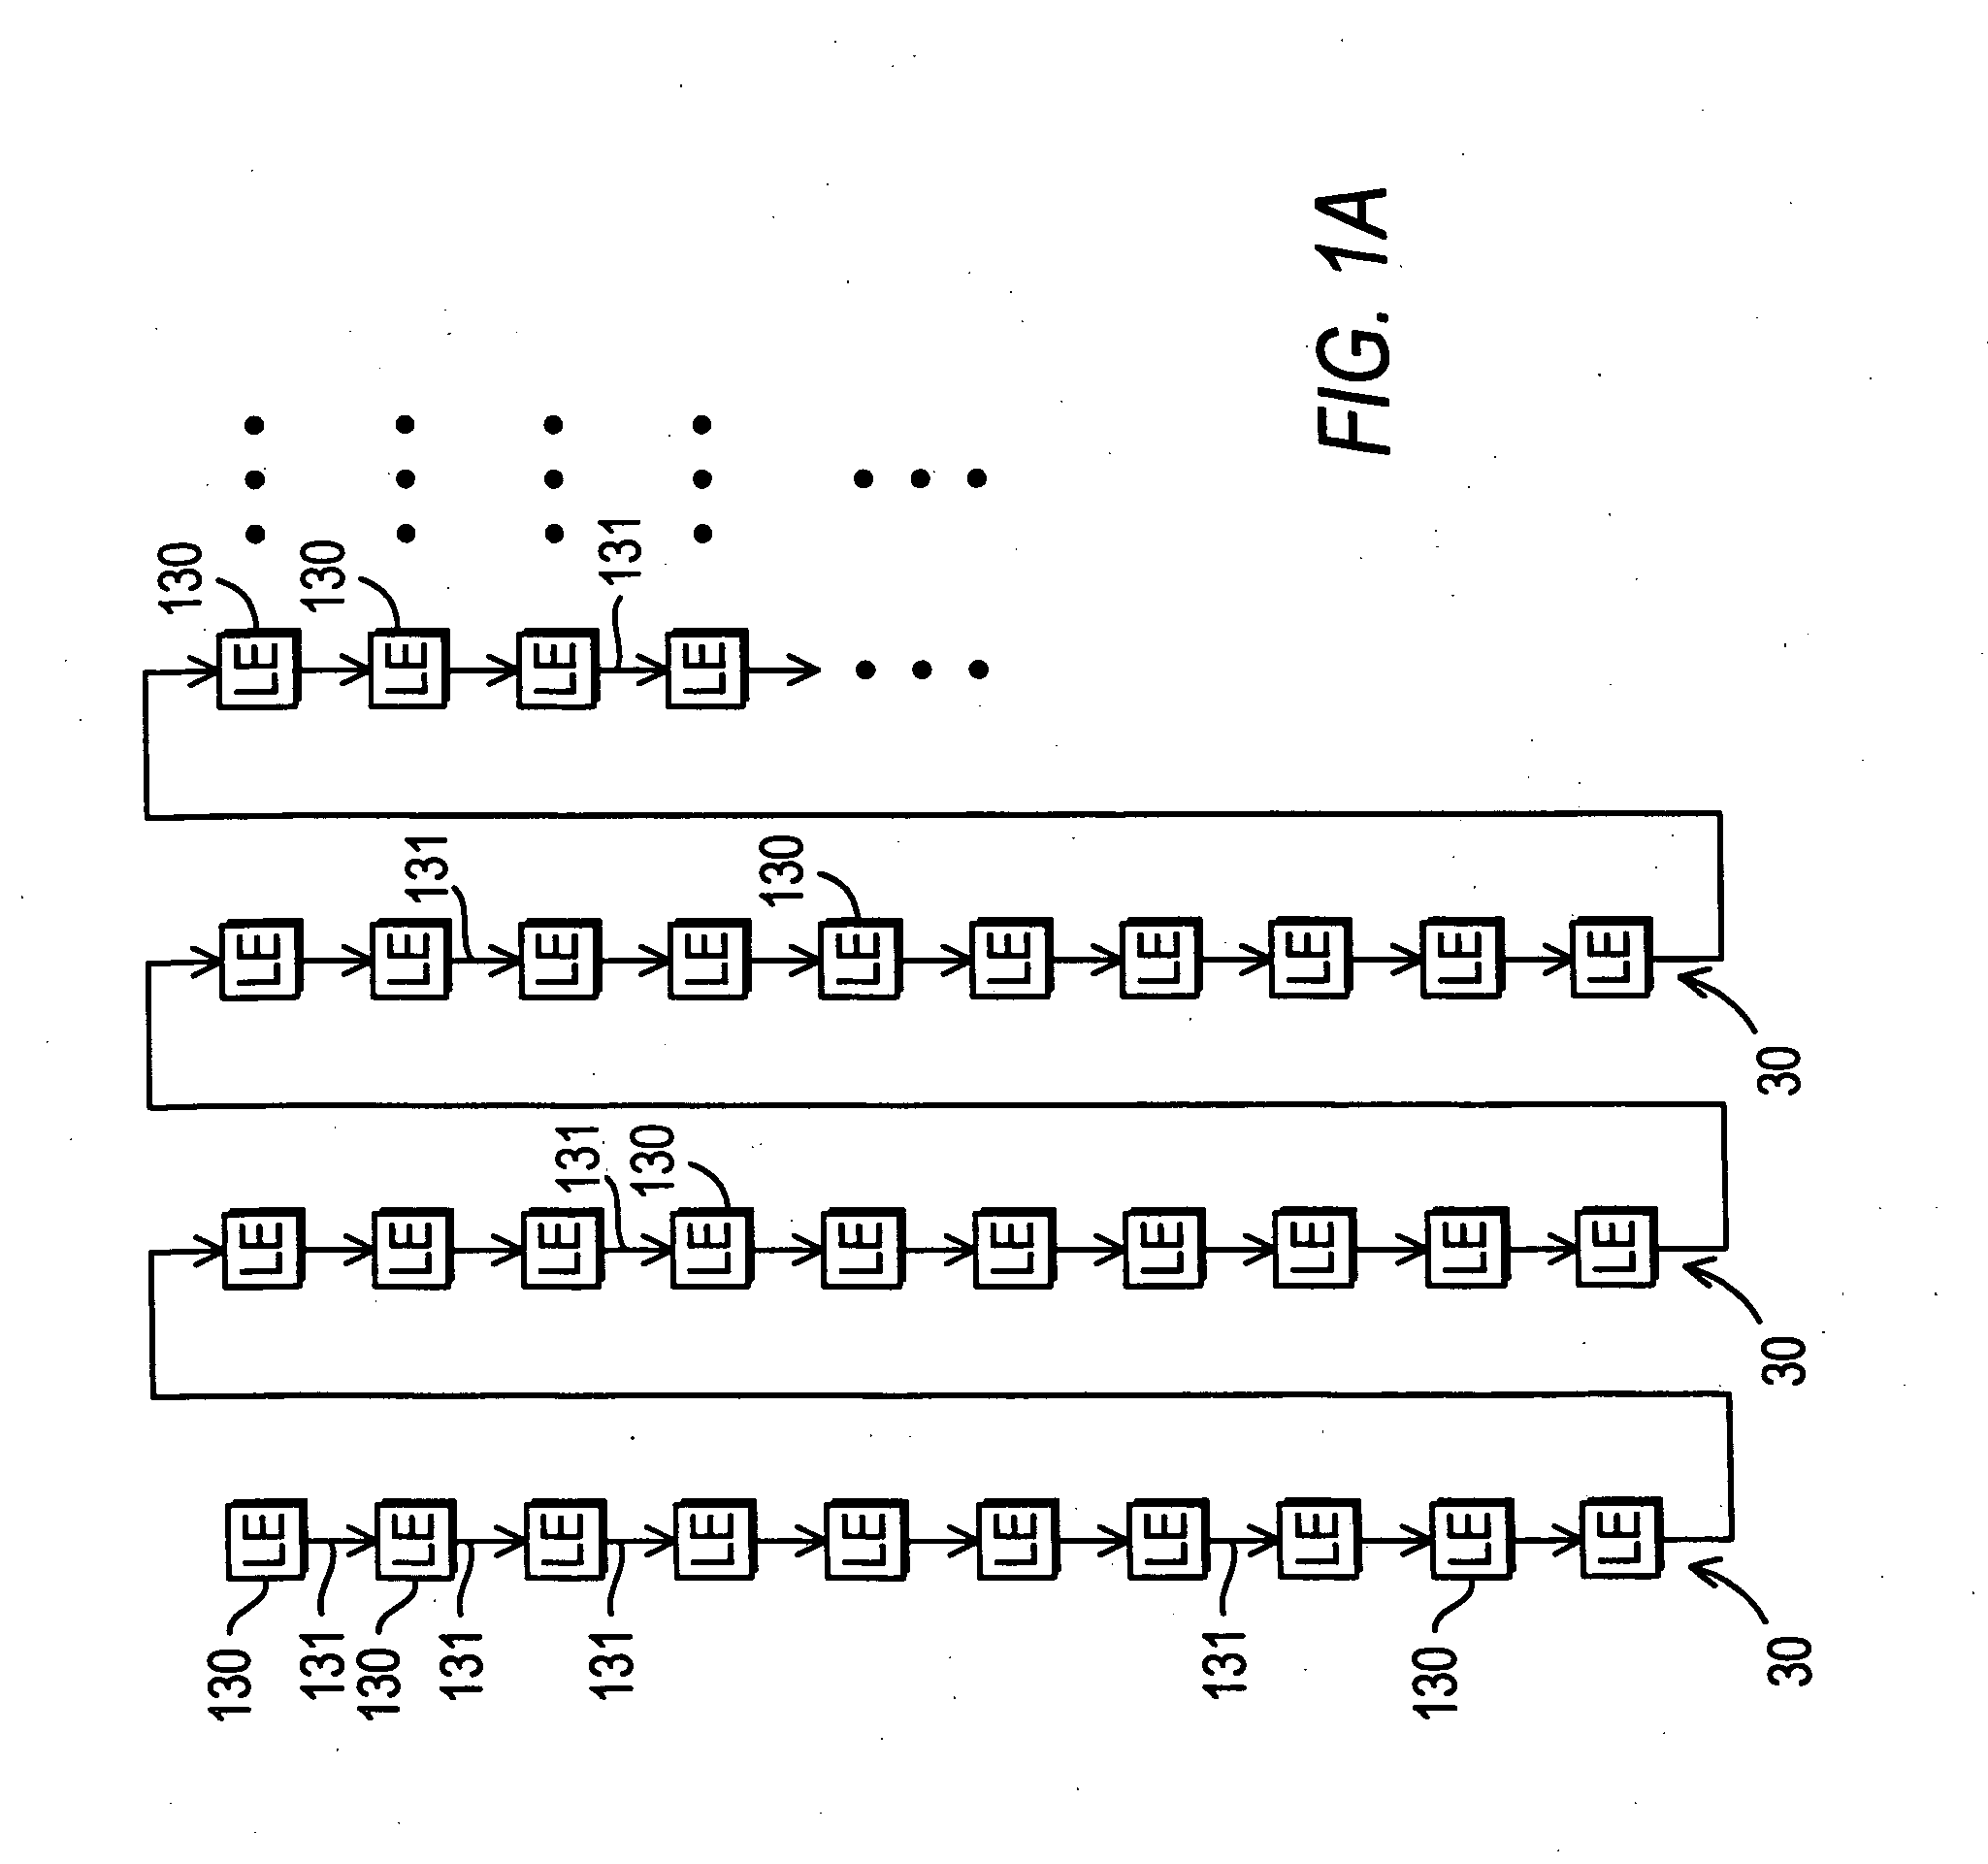 Programmable logic devices with function-specific blocks